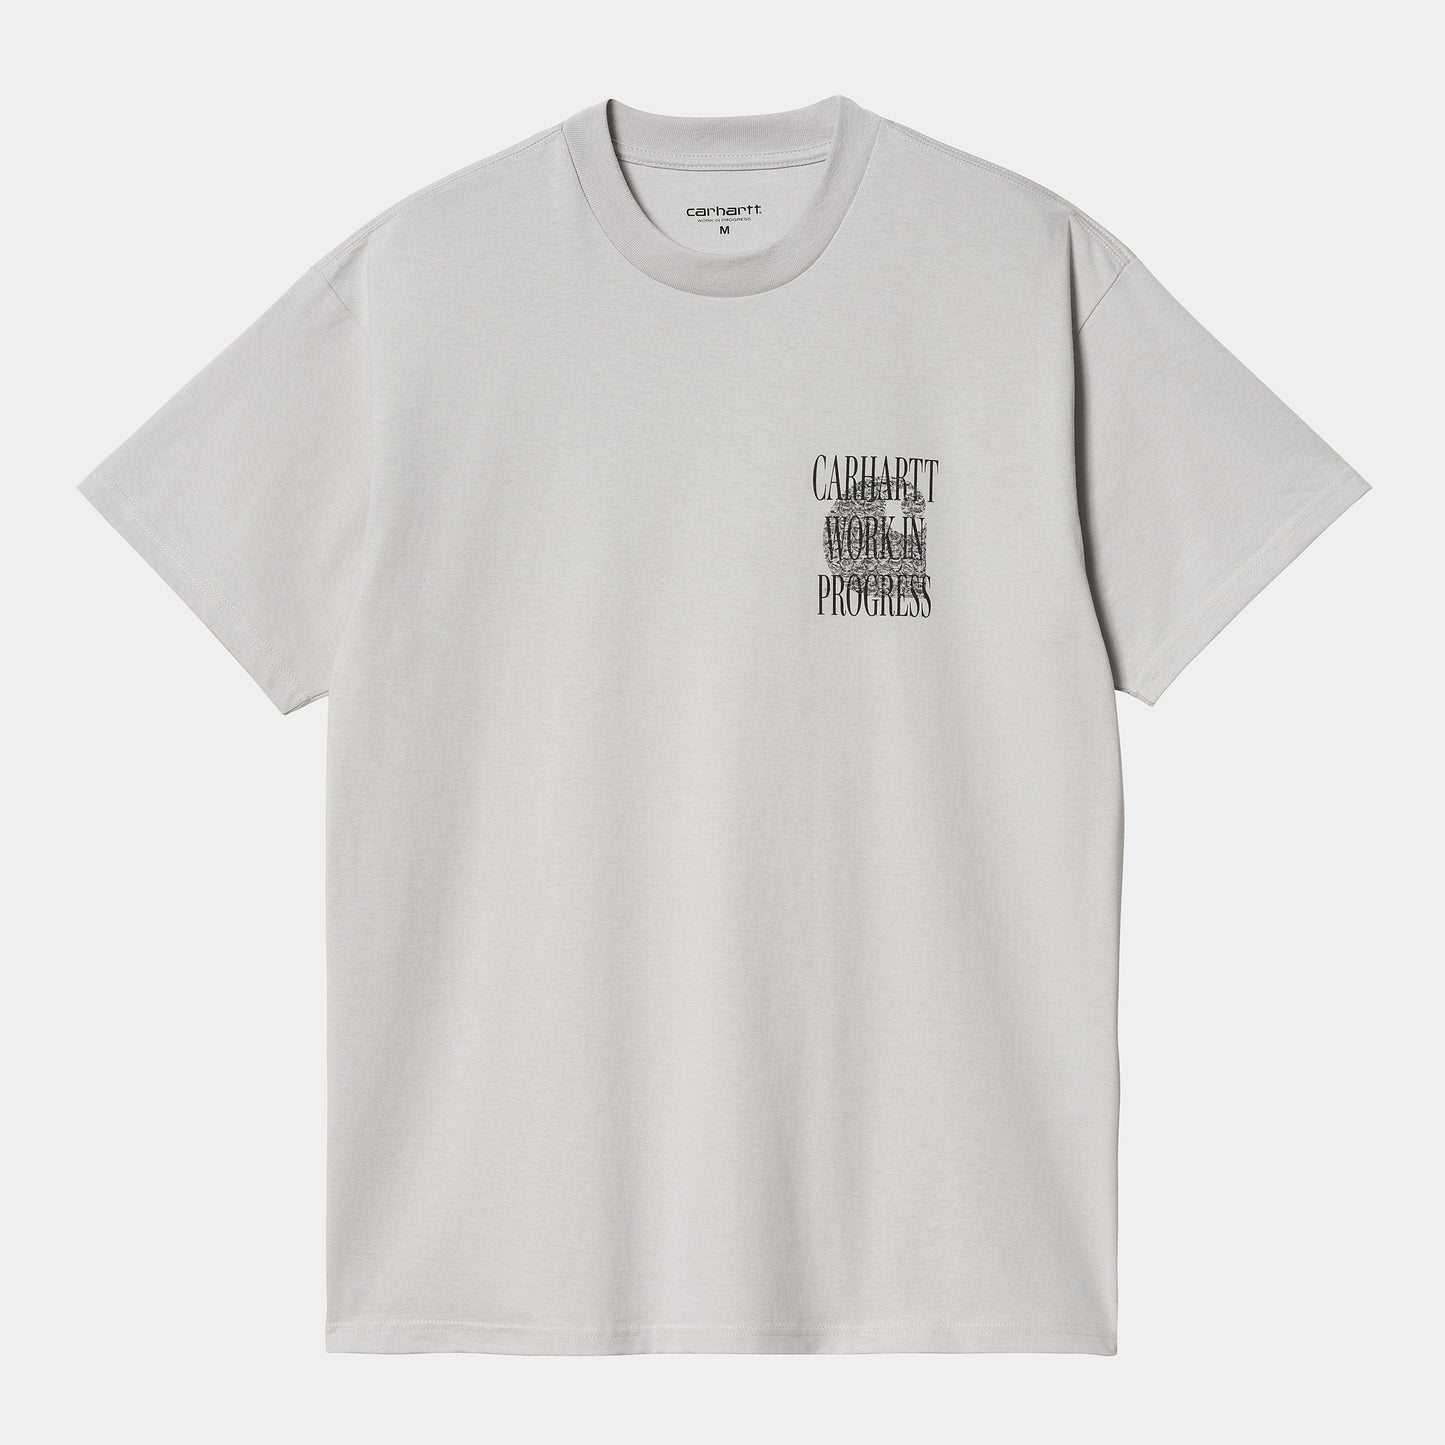 CARHARTT WIP S/S ALWAYS A WIP T-SHIRT - Sonic Silver